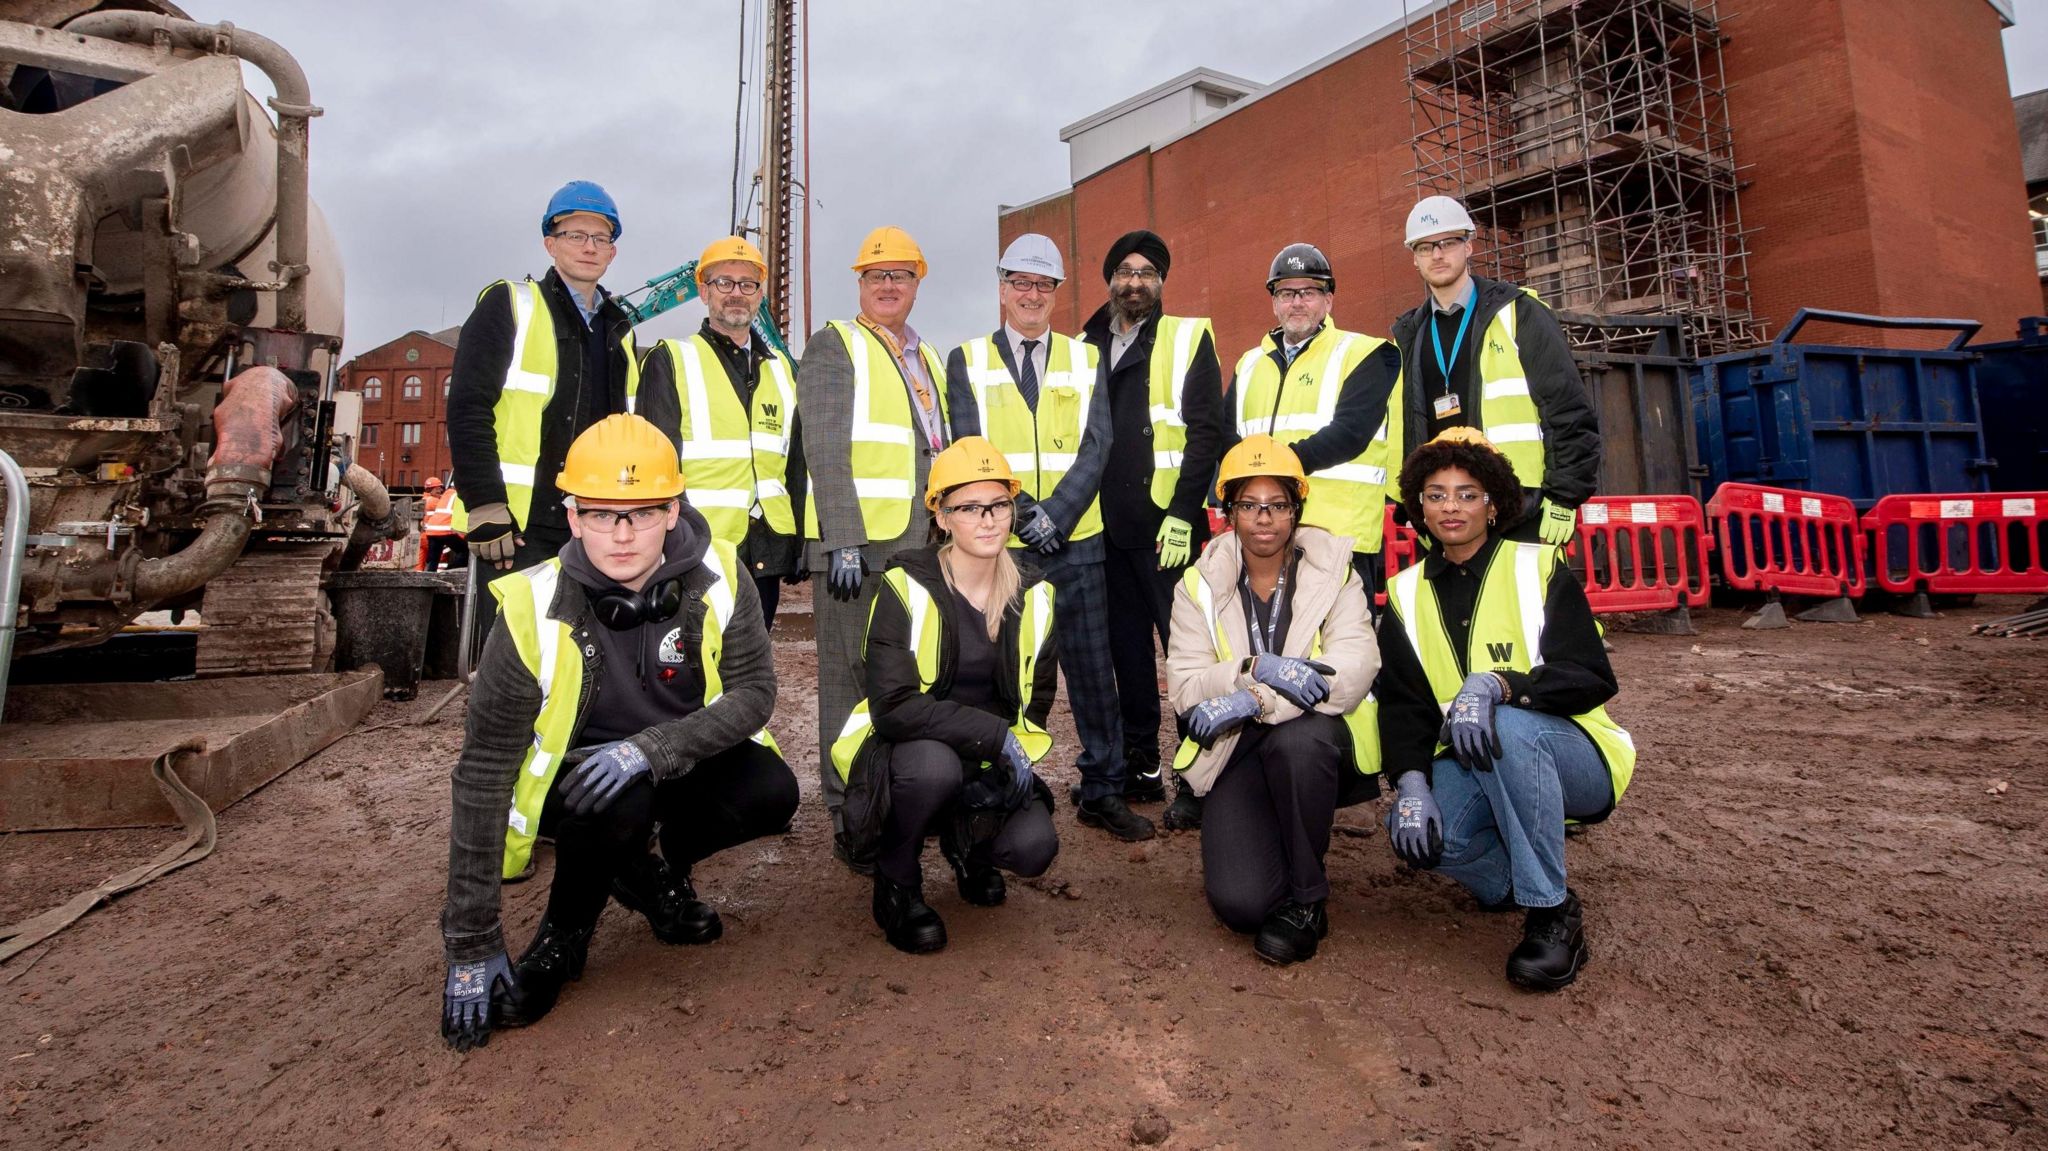 A group of people in hi-vis vests and hard hats on the building site for the City Learning Quarter city centre development